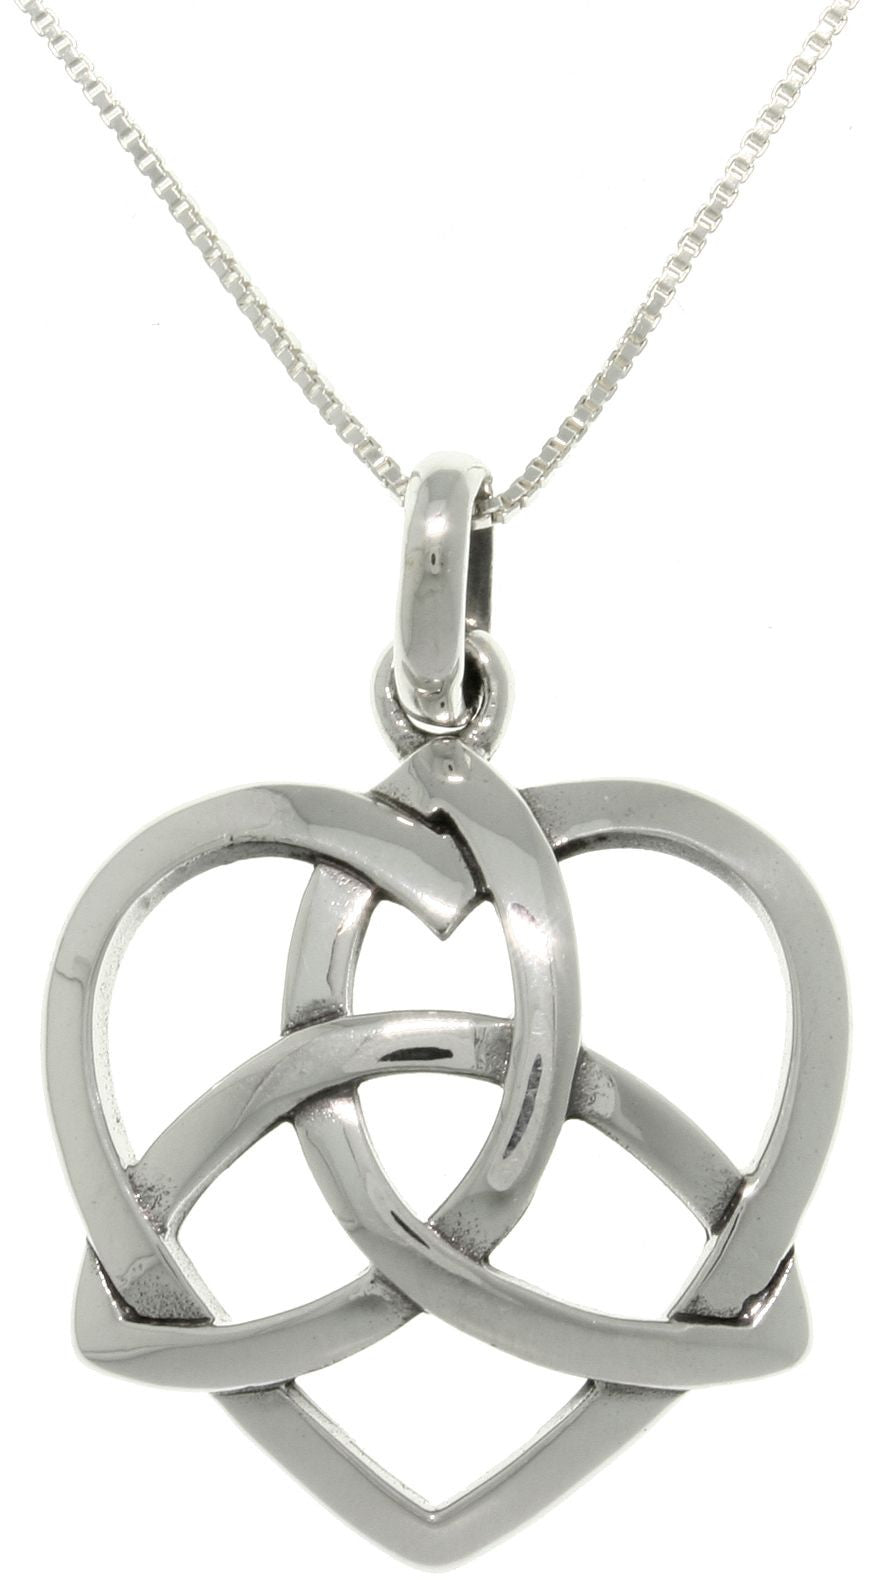 Jewelry Trends Sterling Silver Celtic Trinity Heart Pendant with 18 Inch Box Chain Necklace Gift